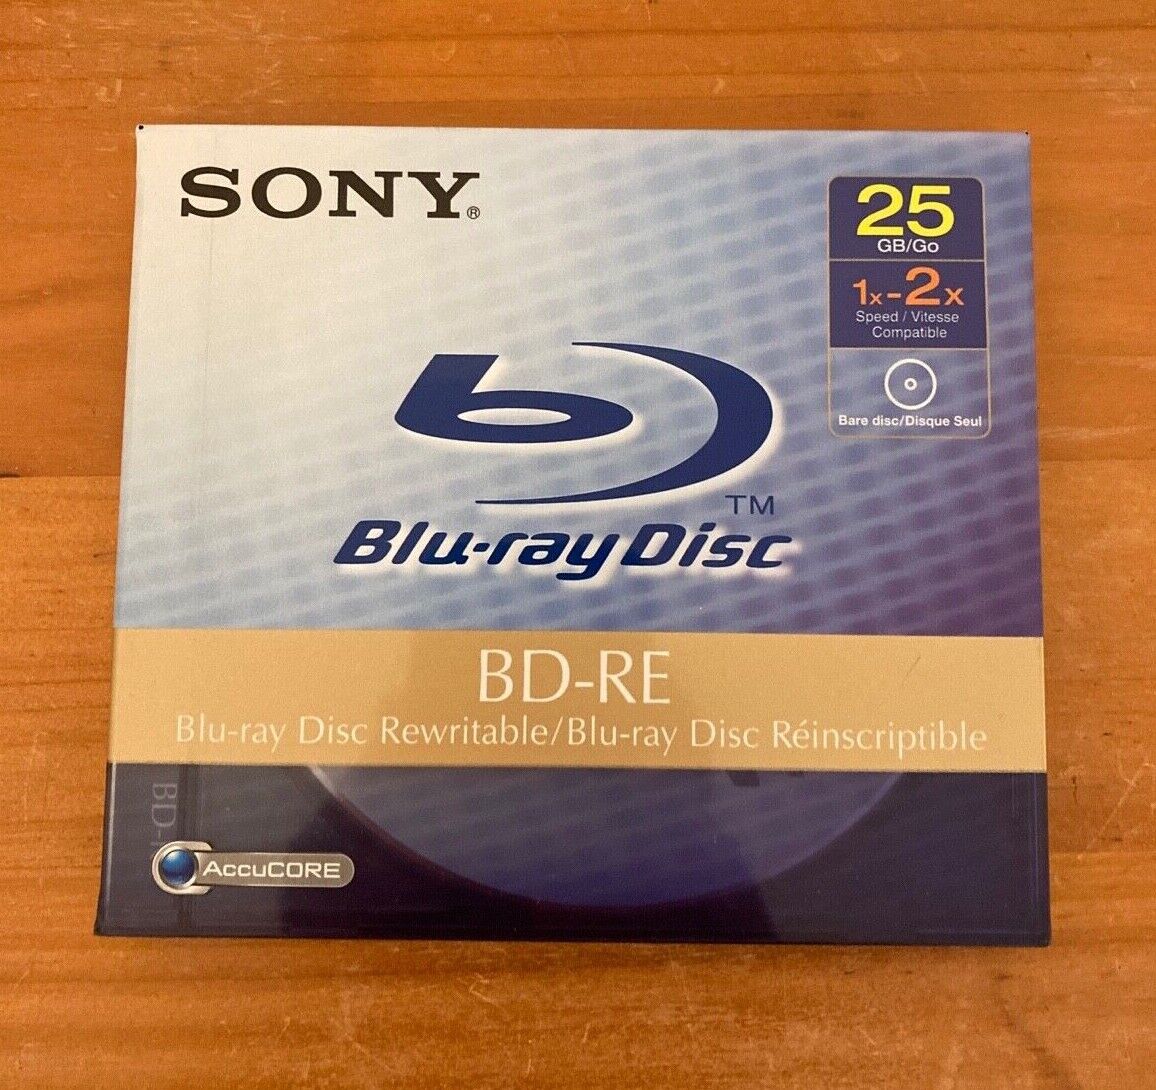 New - Sony Blu-Ray Disc BD-RE 25GB 1x-2x Speed Rewritable AccuCore